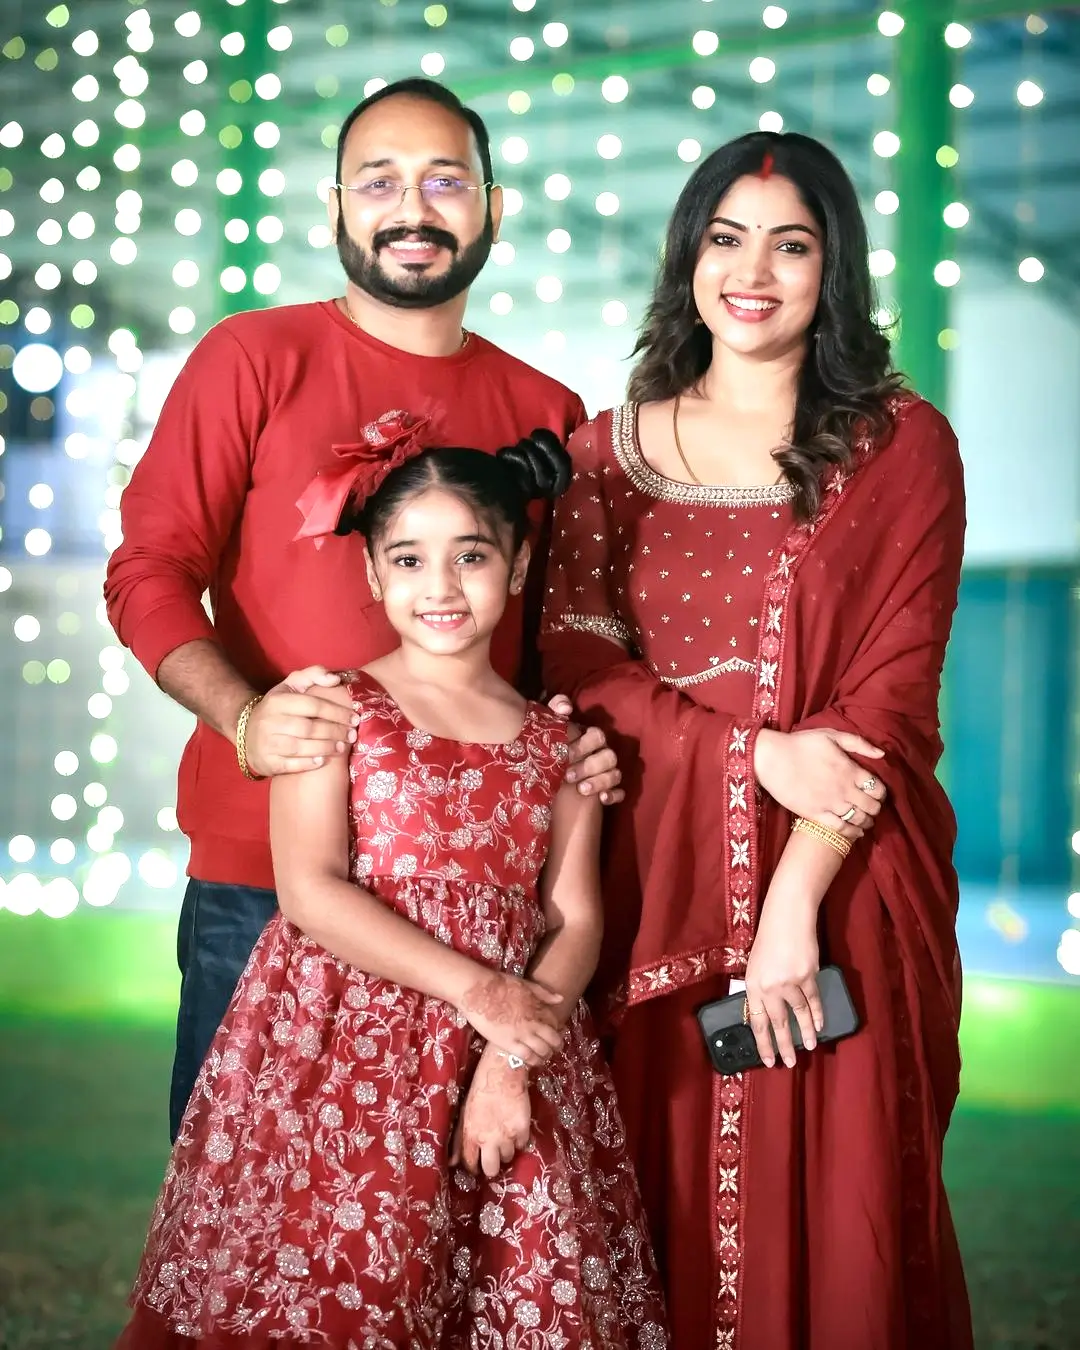 Muktha with her husband and daughter